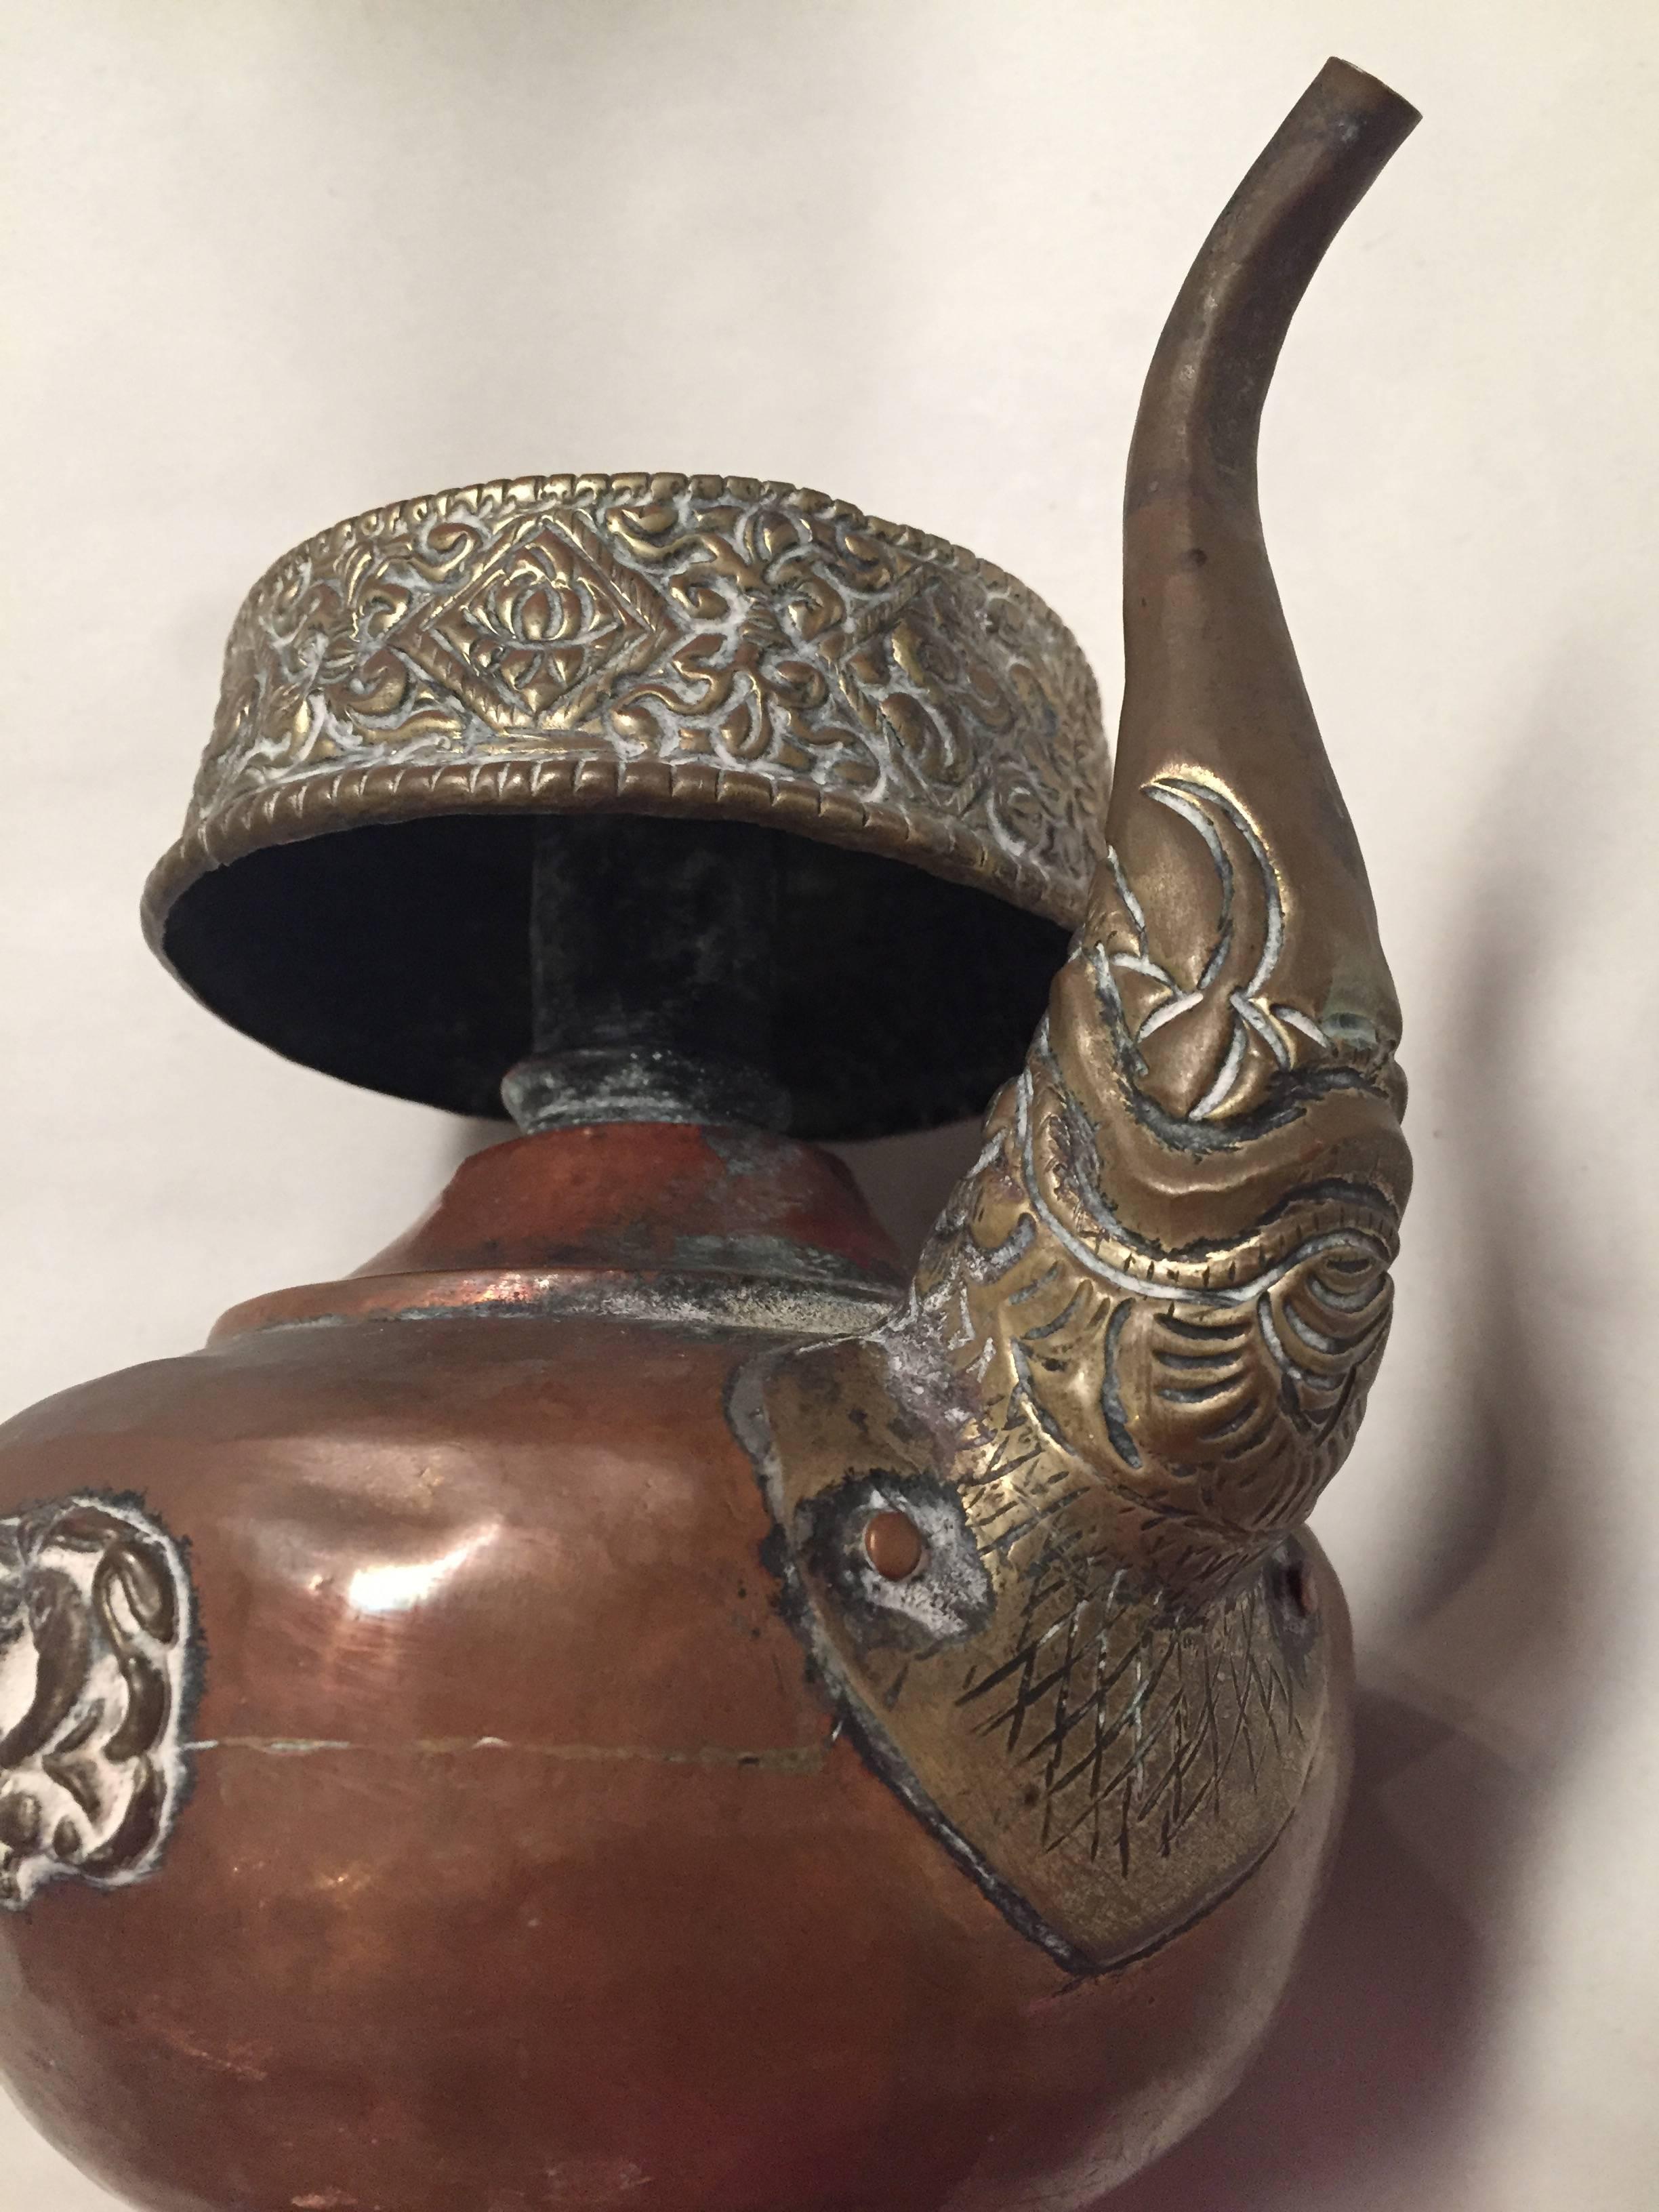 This beautiful Tibetan teapot is used to store and serve buttermilk tea. The pot is decorated with Tibetan auspicious symbols. The top is fully adorned with embossing of lucky signs and a lotus pattern. The elaboration extends to the spout of the